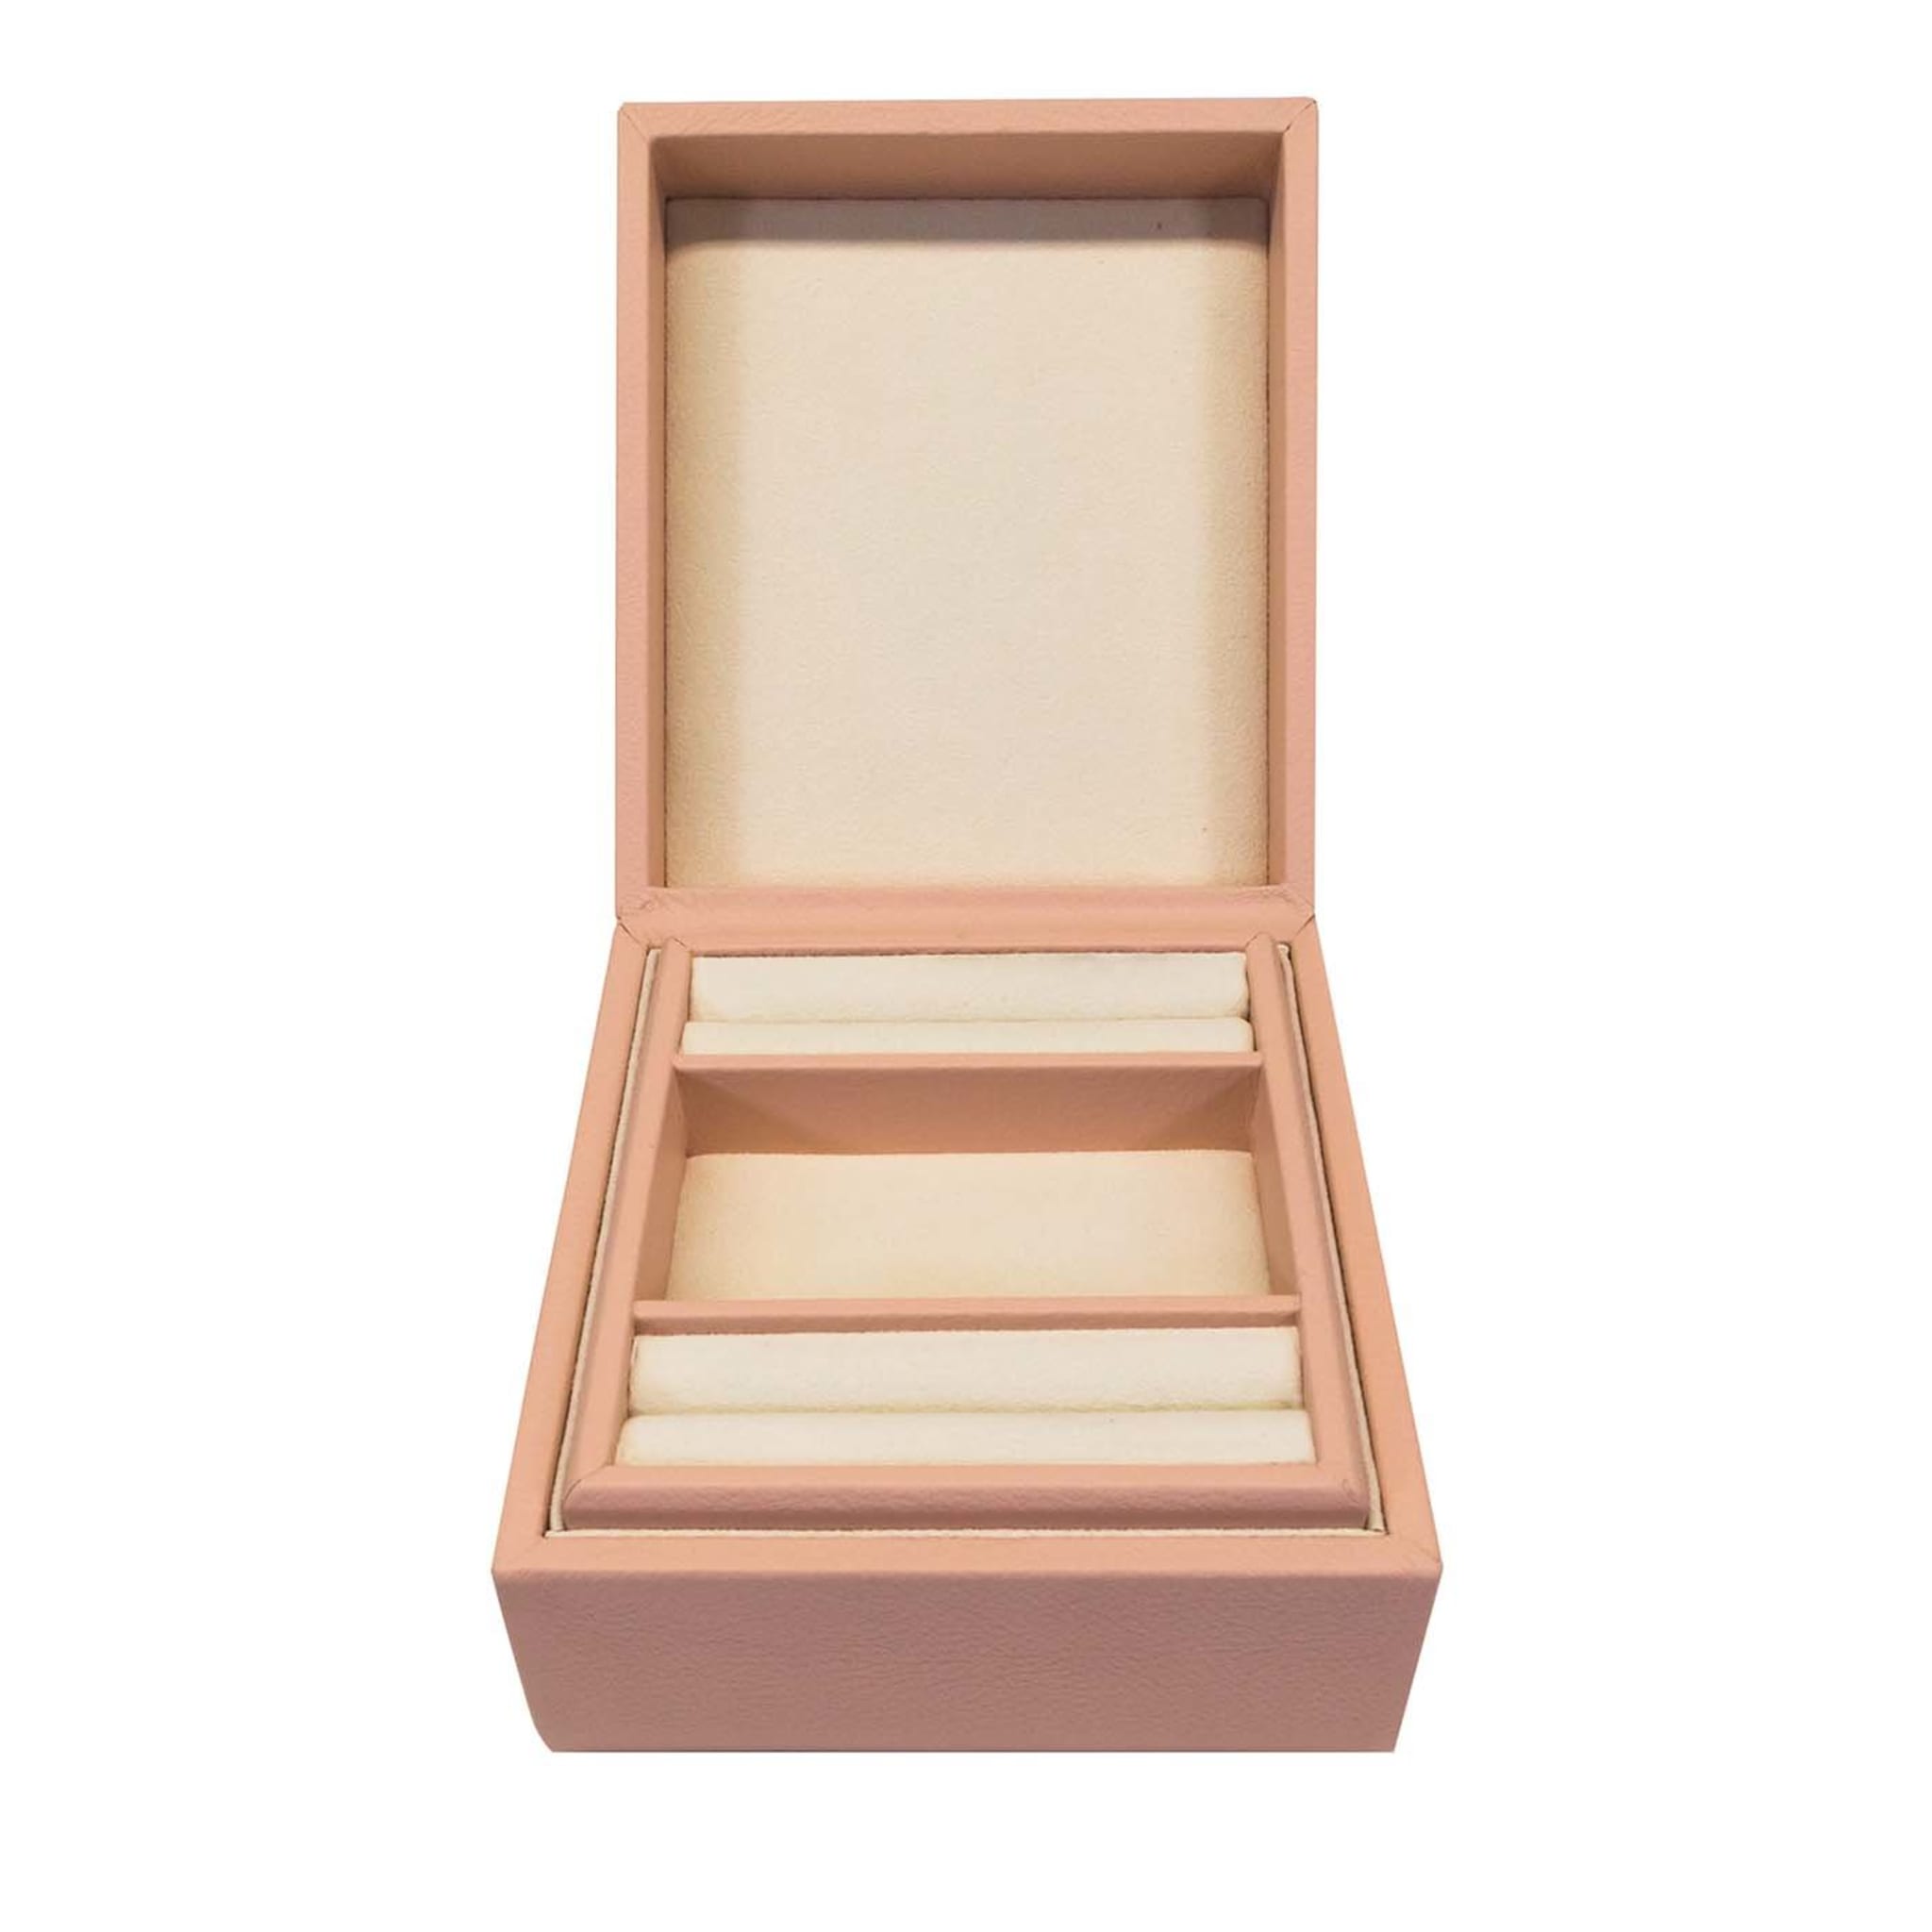 Arc Jewelry Box with Removable Tray - Main view